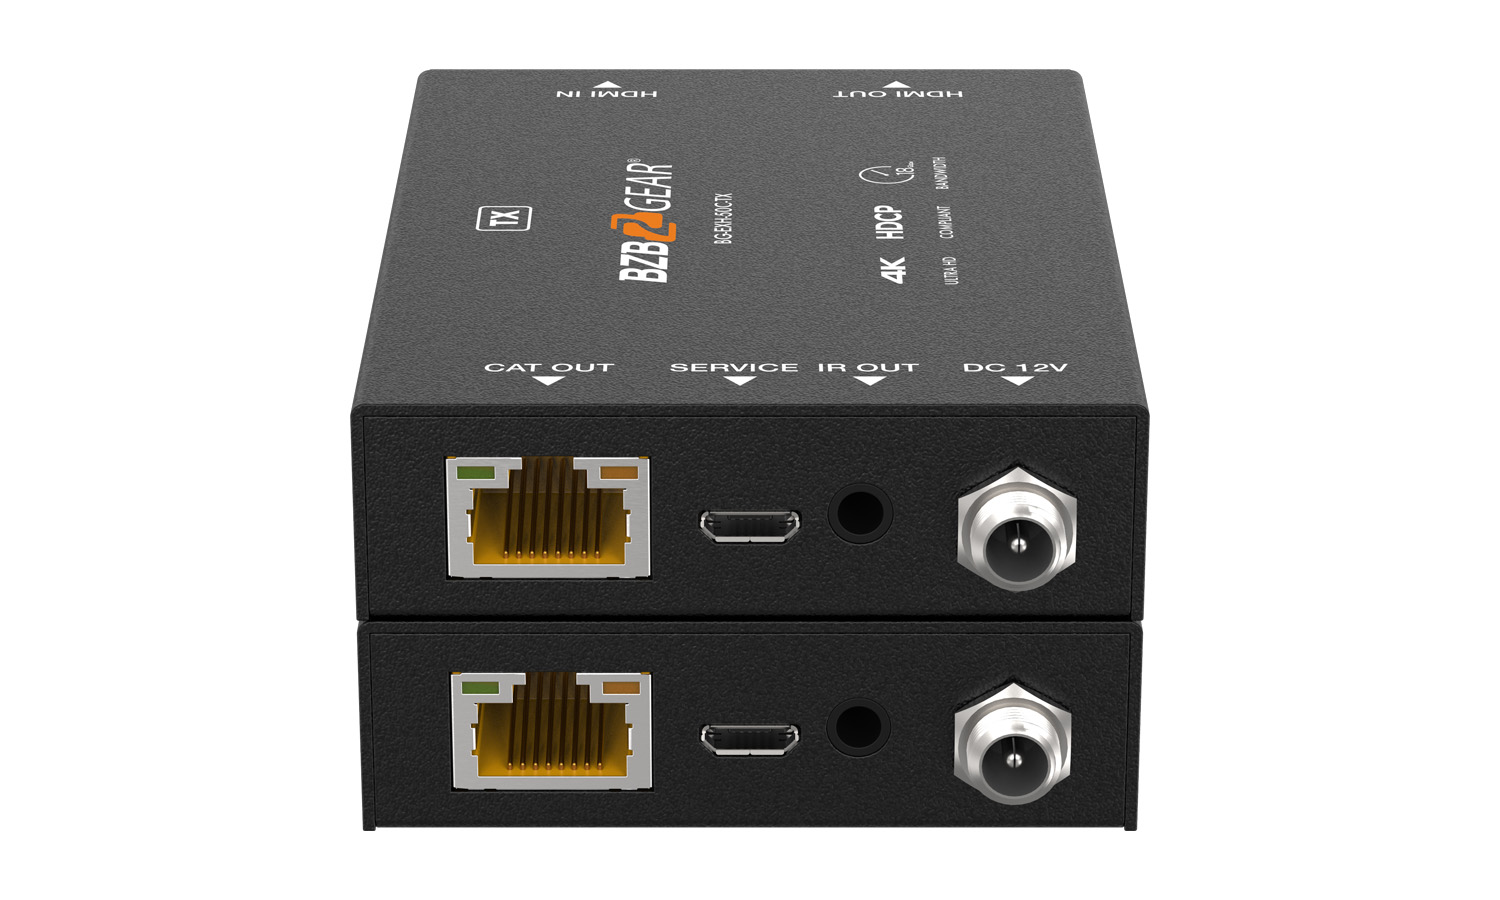 BZBGEAR BG-EXH-50C 4K UHD HDMI Extender with Bi-directional IR over a Single Cat5e/6/7 up to 165ft